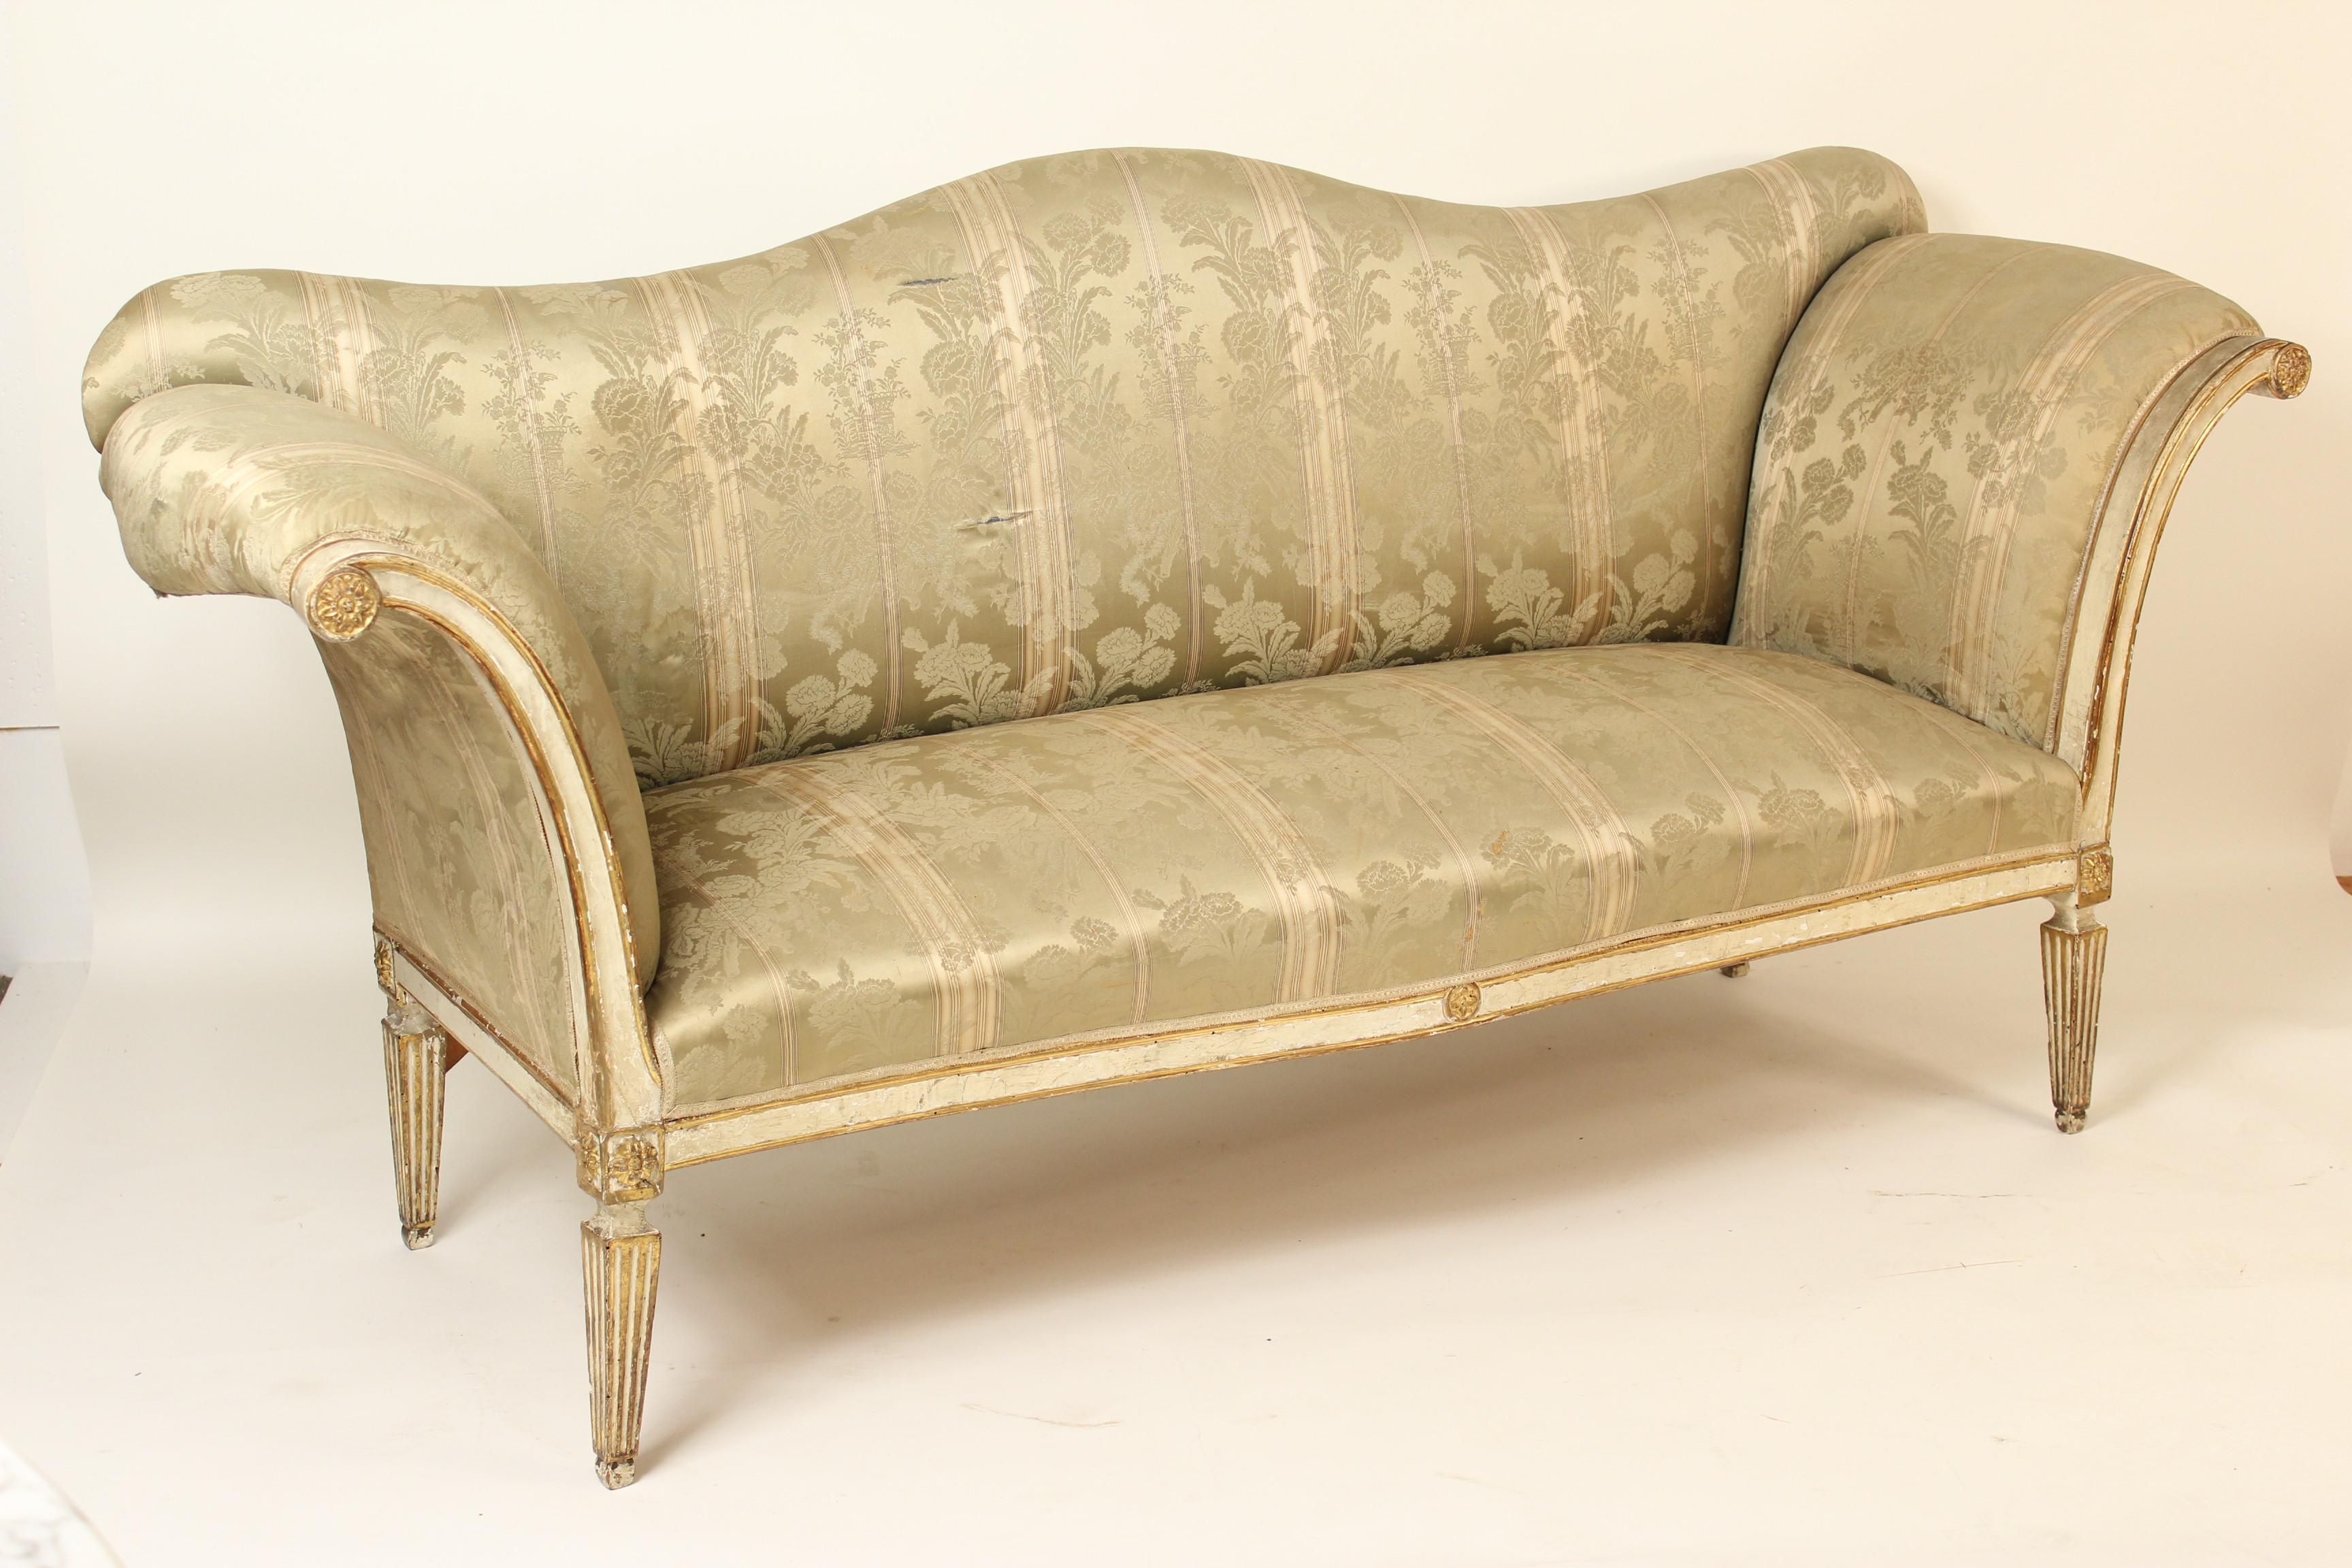 European Antique Louis XVI Style Painted and Partial Gilt Settee